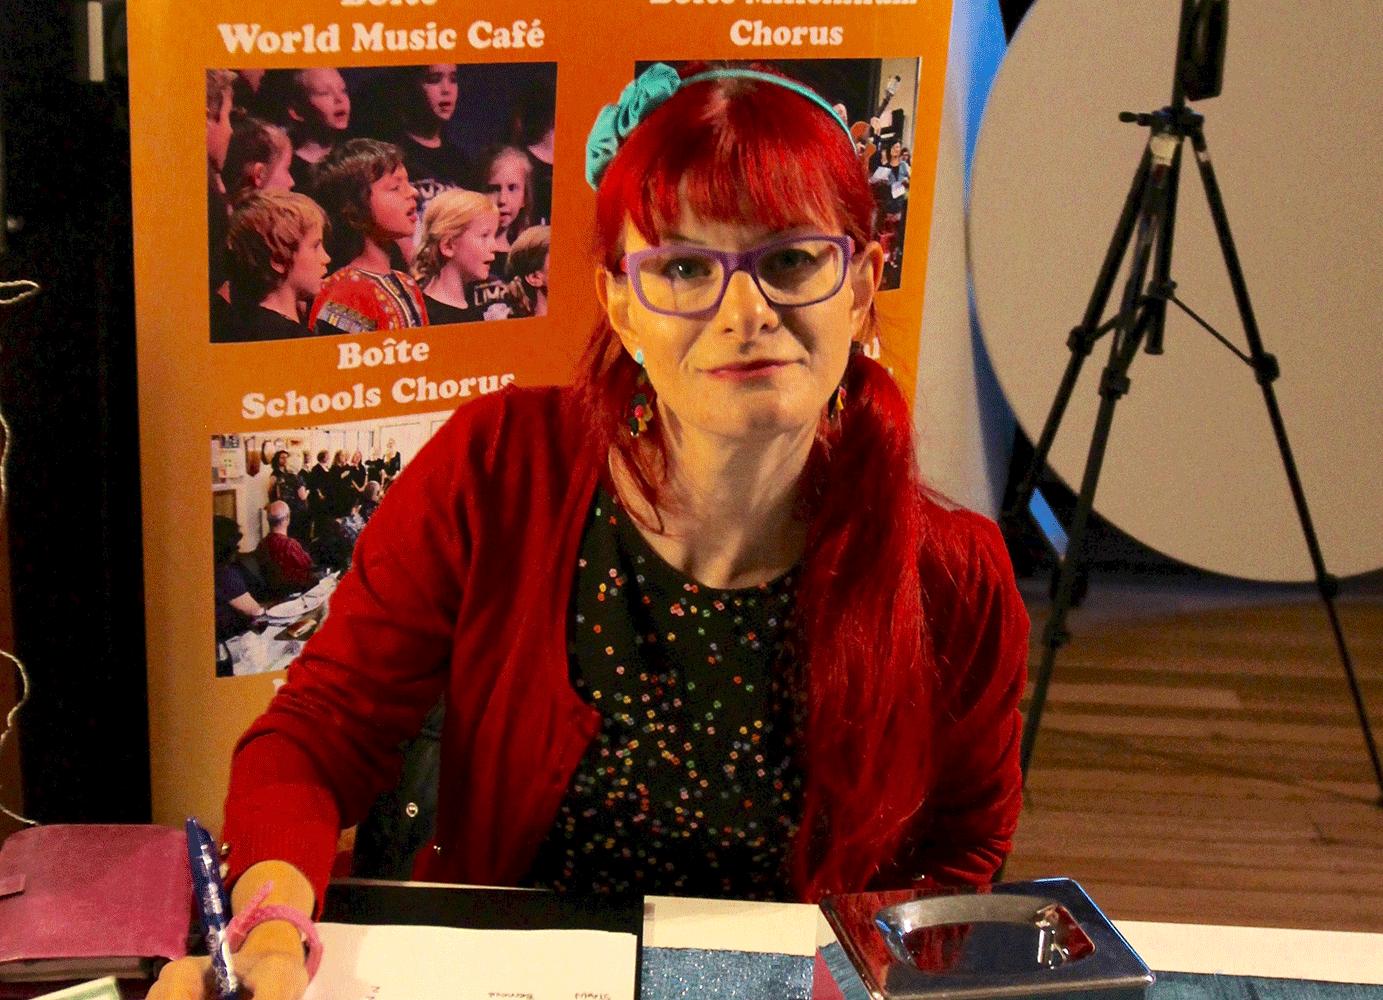 A woman with bright red hair and glasses sitting at a desk